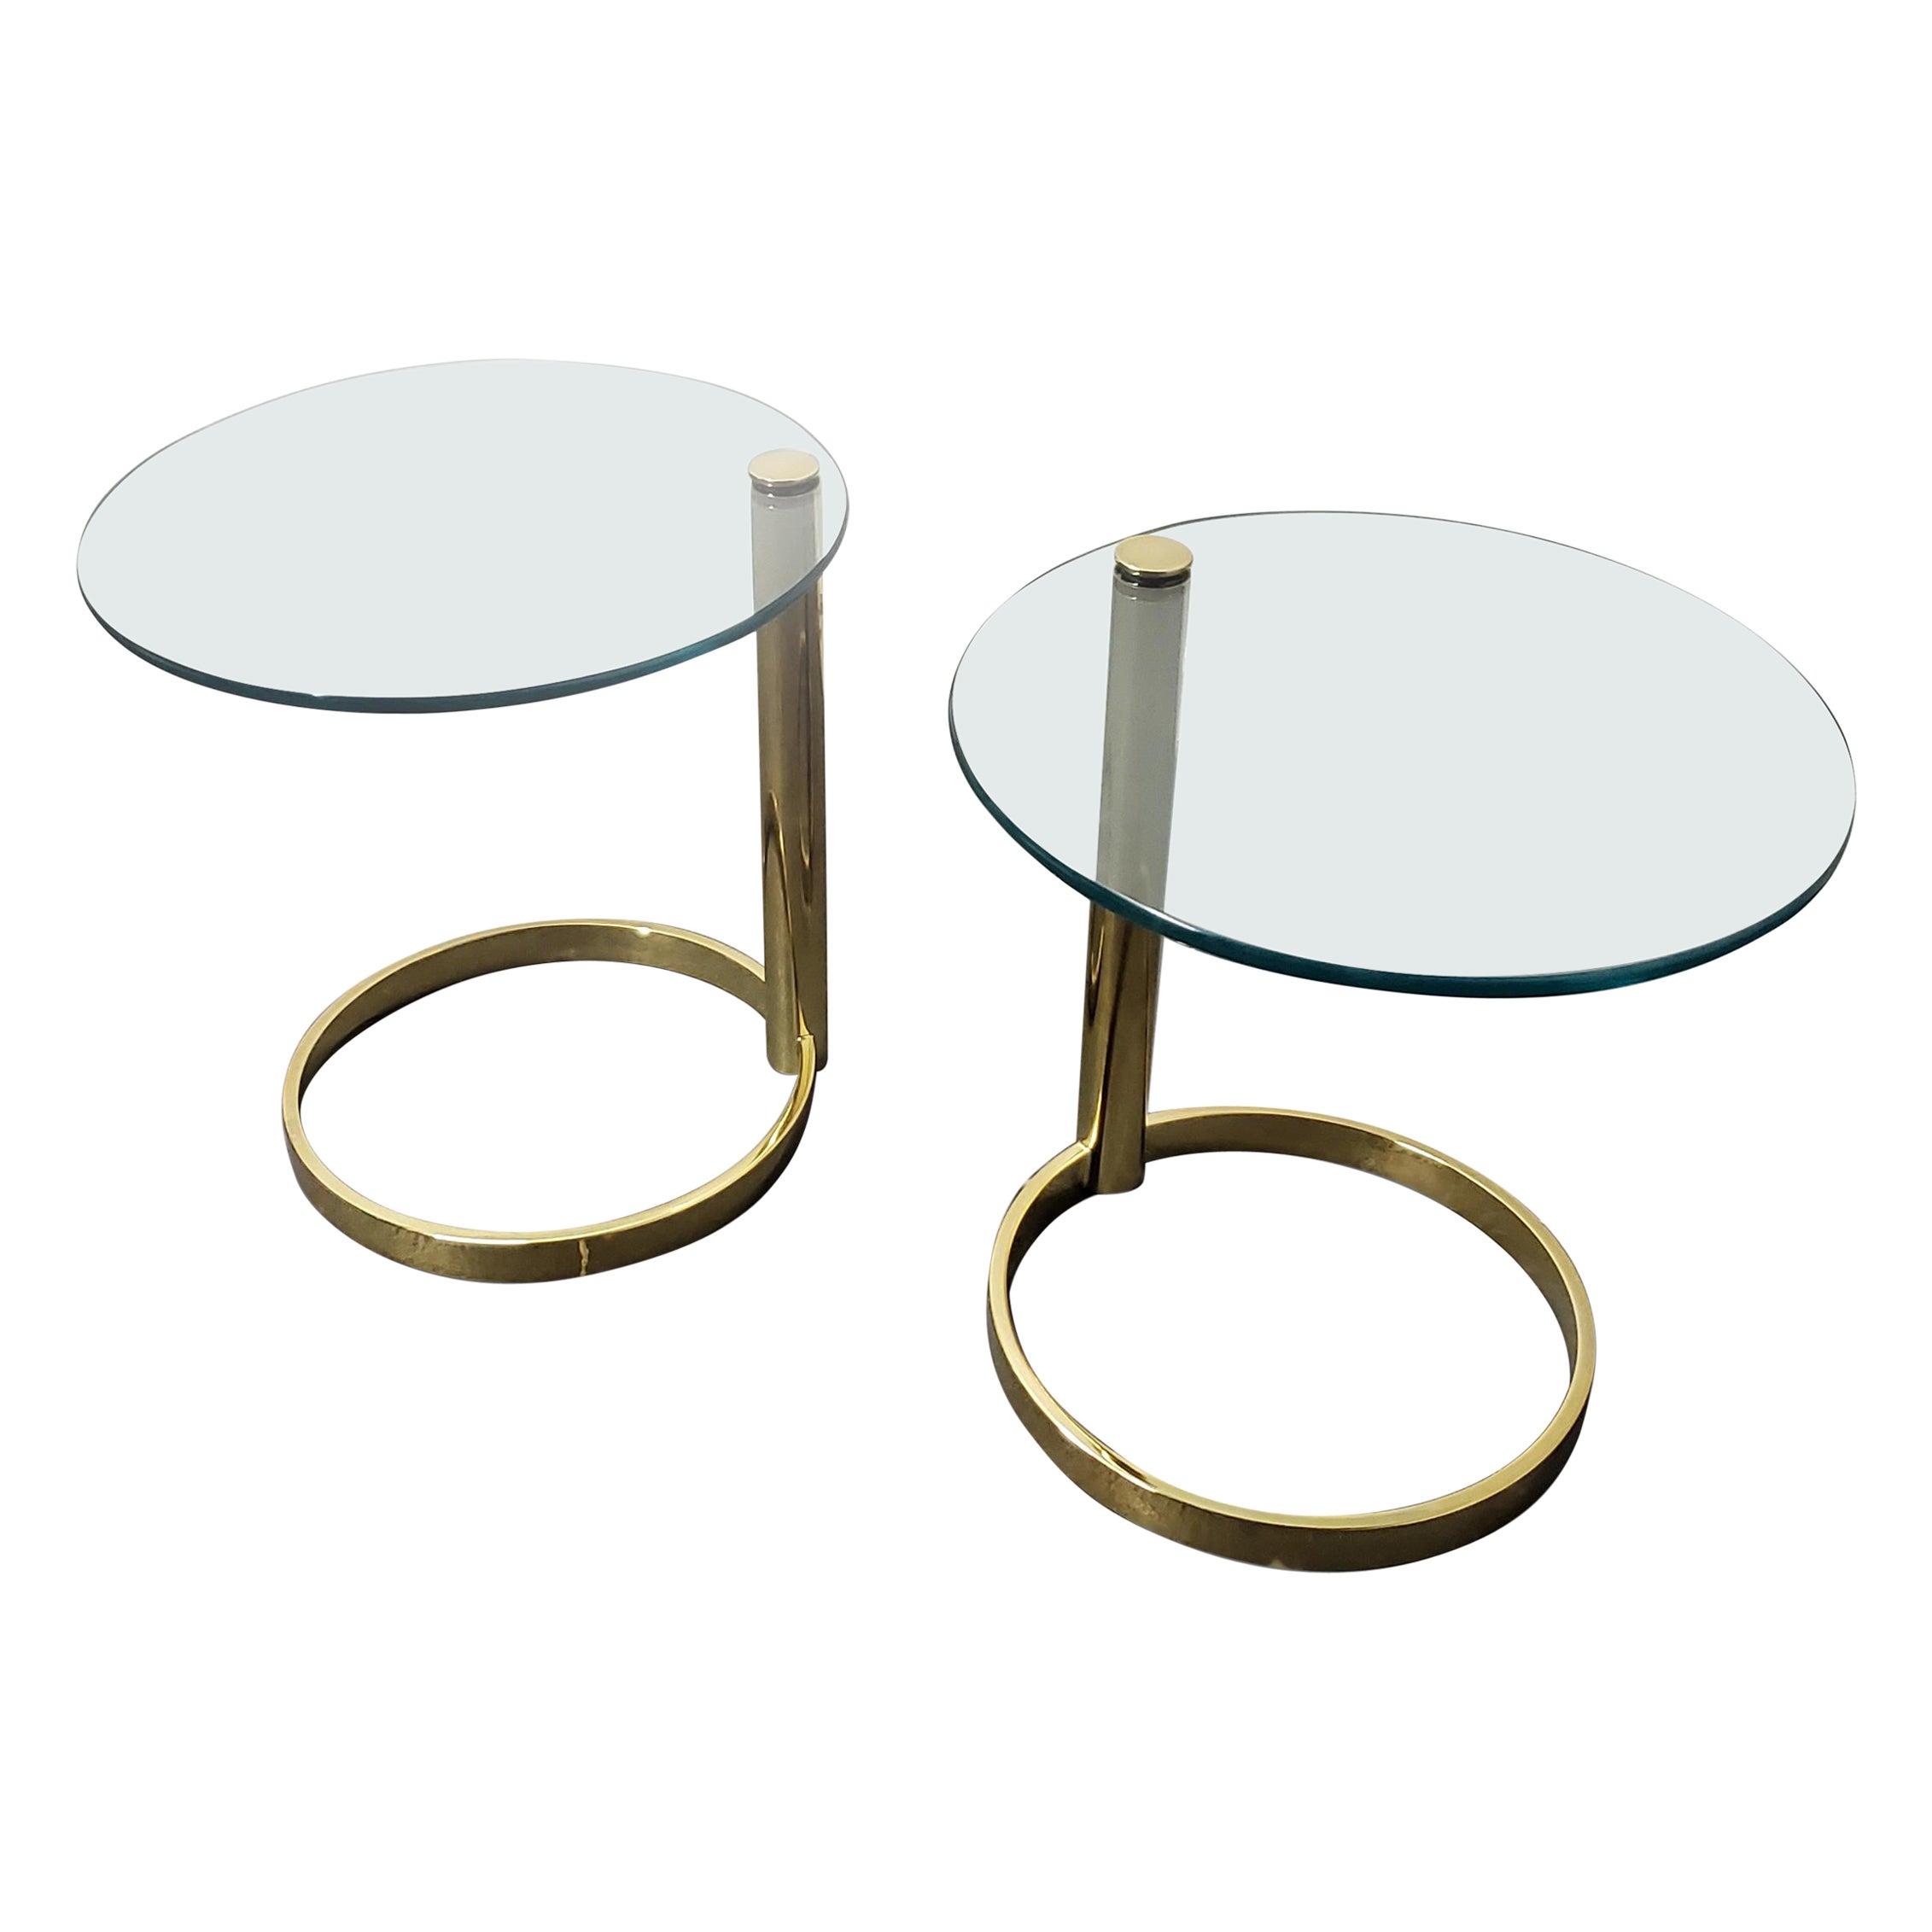 Pair of Leon Rosen for Pace Brass Side Tables 